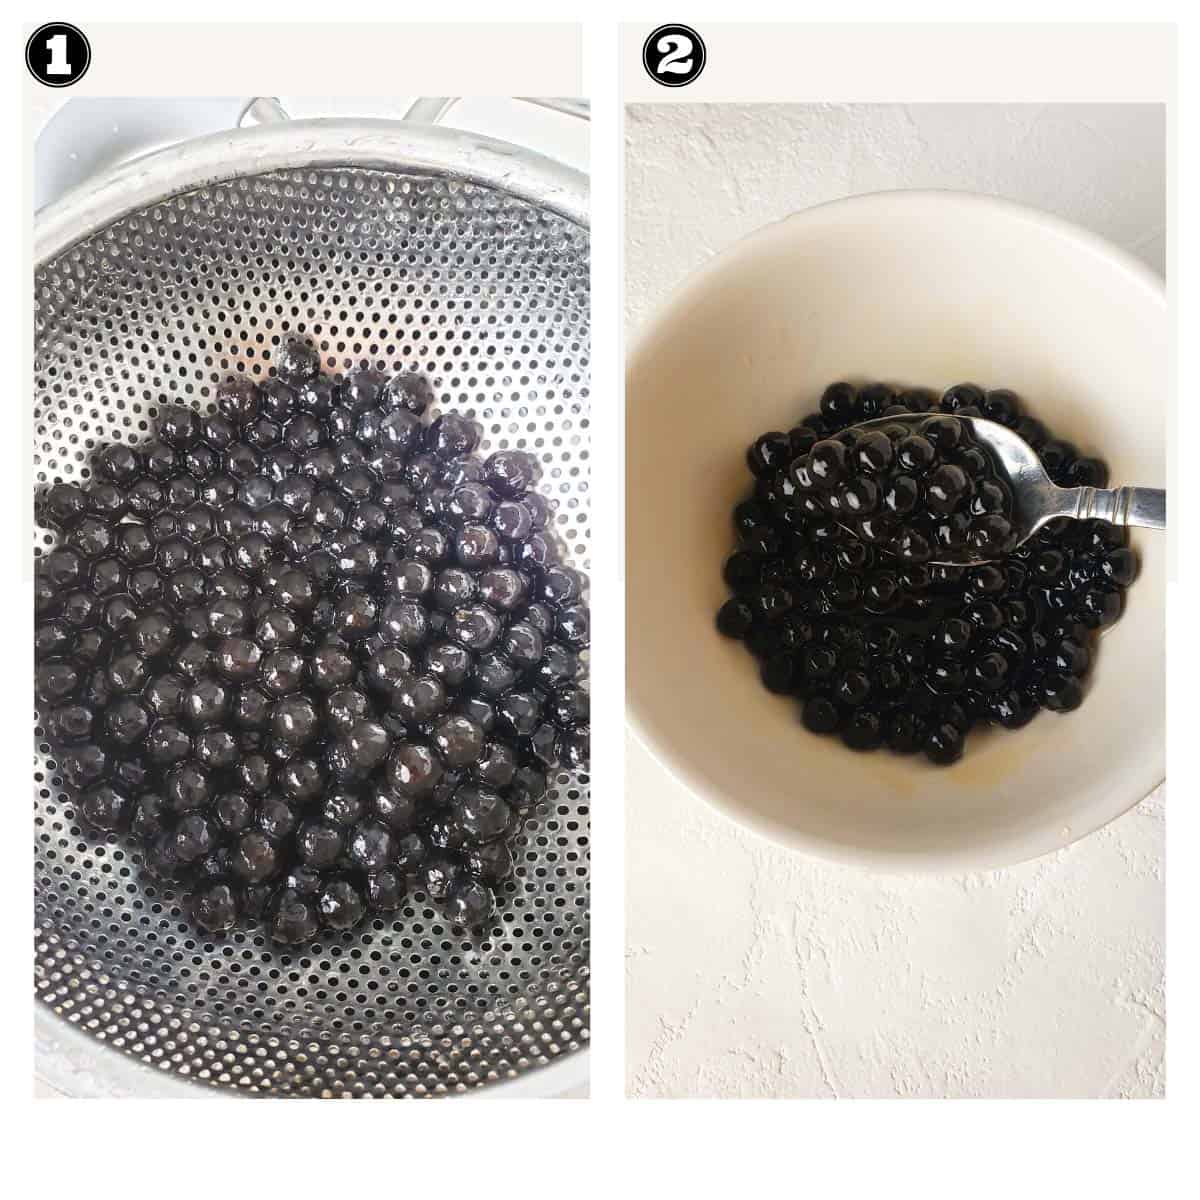 images showing cooked boba dunked in brown sugar syrup